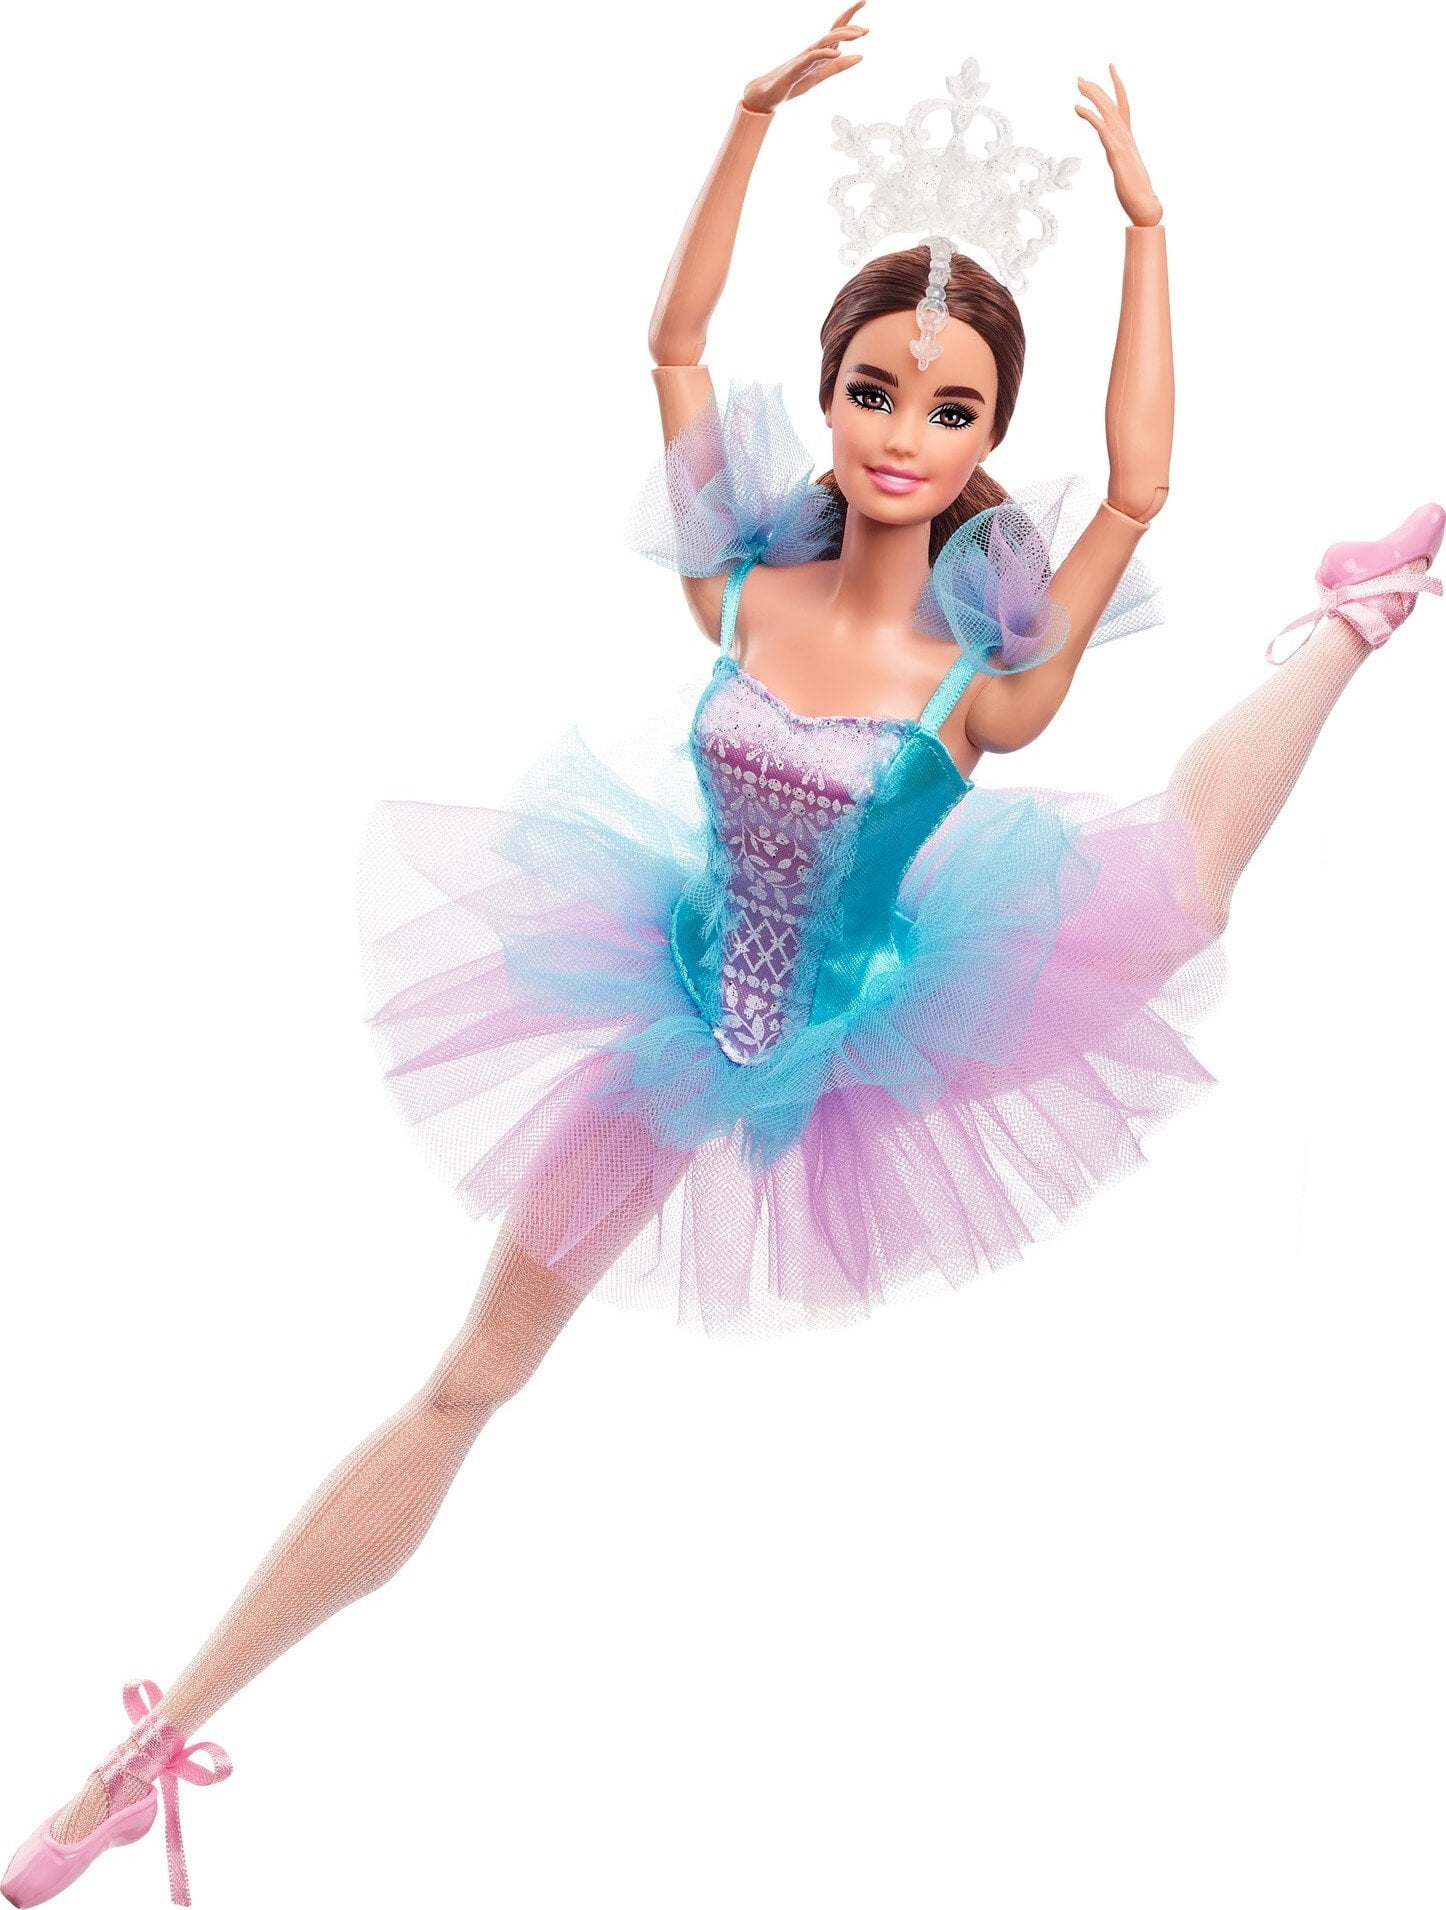 Barbie Signature Ballet Wishes Doll, Posable, Gift for 6 Year Olds and Up